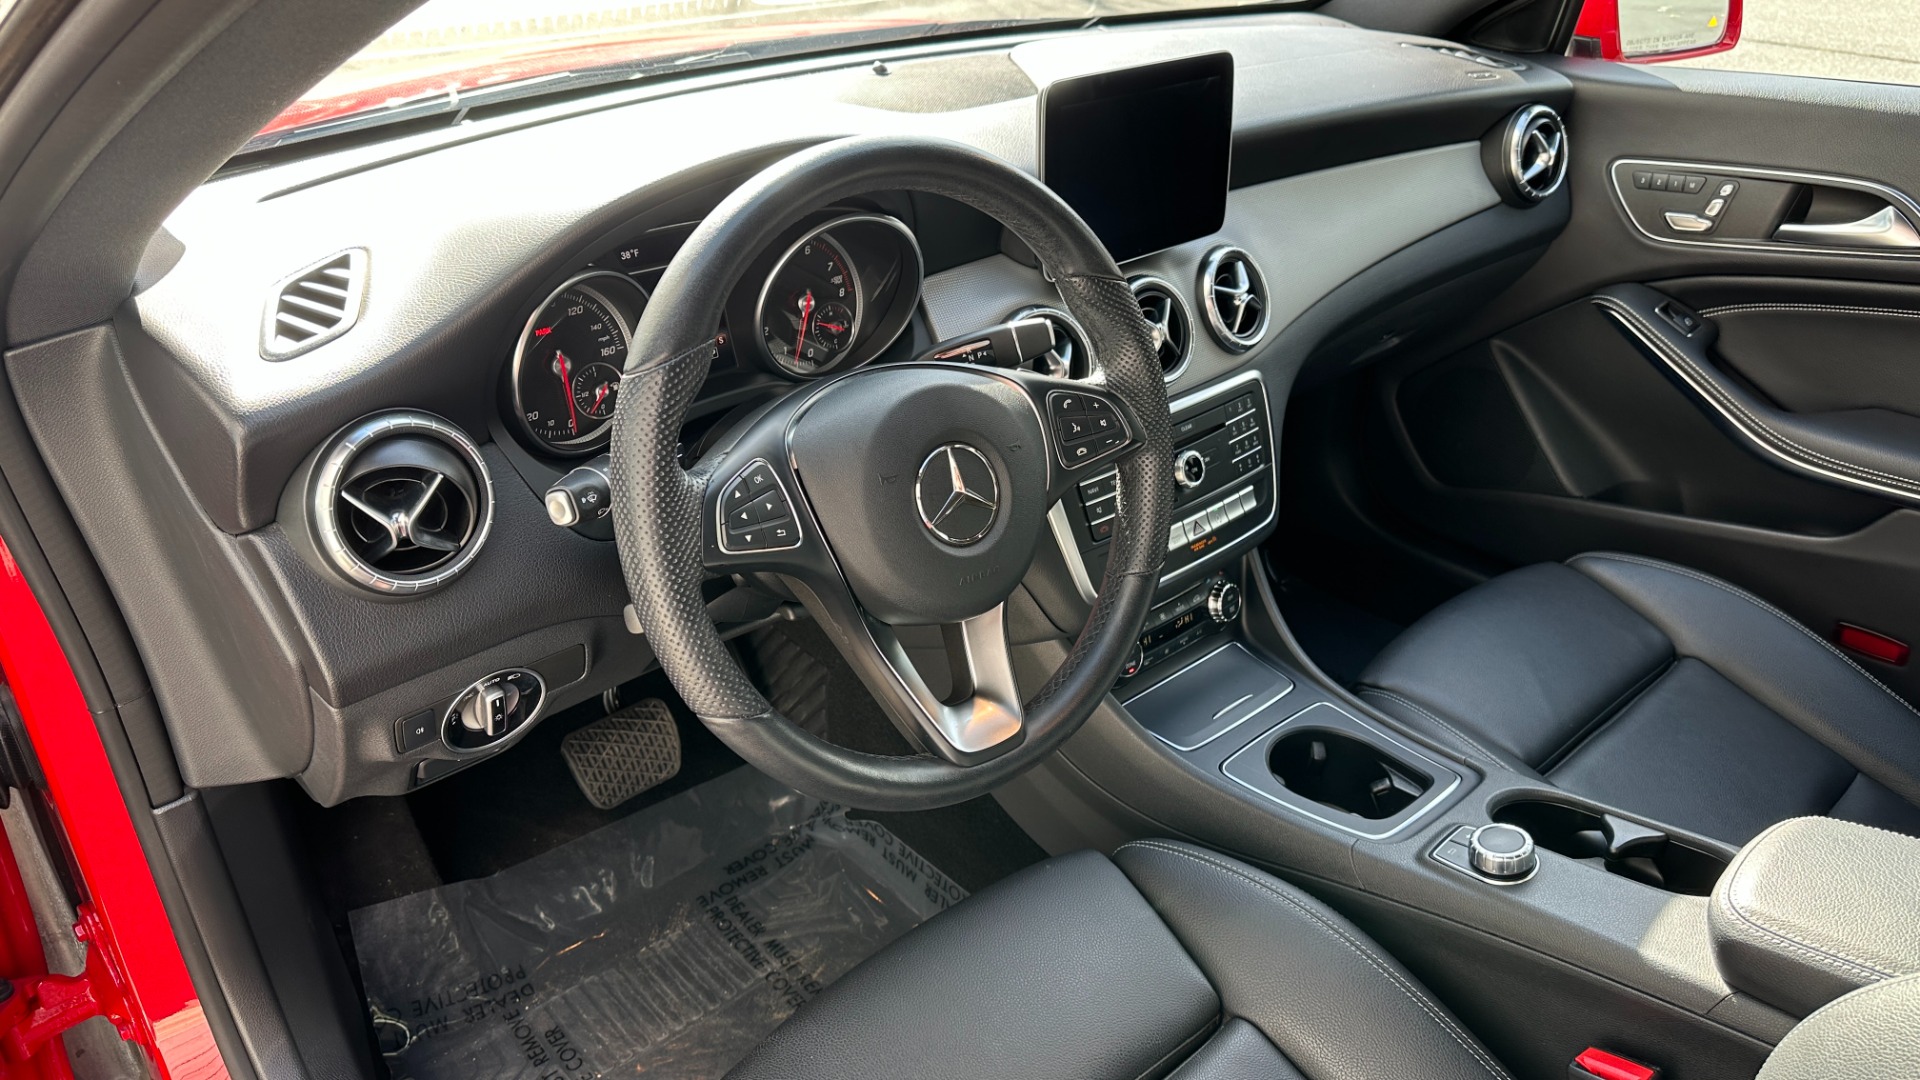 Used 2019 Mercedes-Benz CLA CLA 250 / APPLE CARPLAY / 17IN WHEELS / COMFORT SUSPENSION / BLINDSPOT for sale $27,995 at Formula Imports in Charlotte NC 28227 9